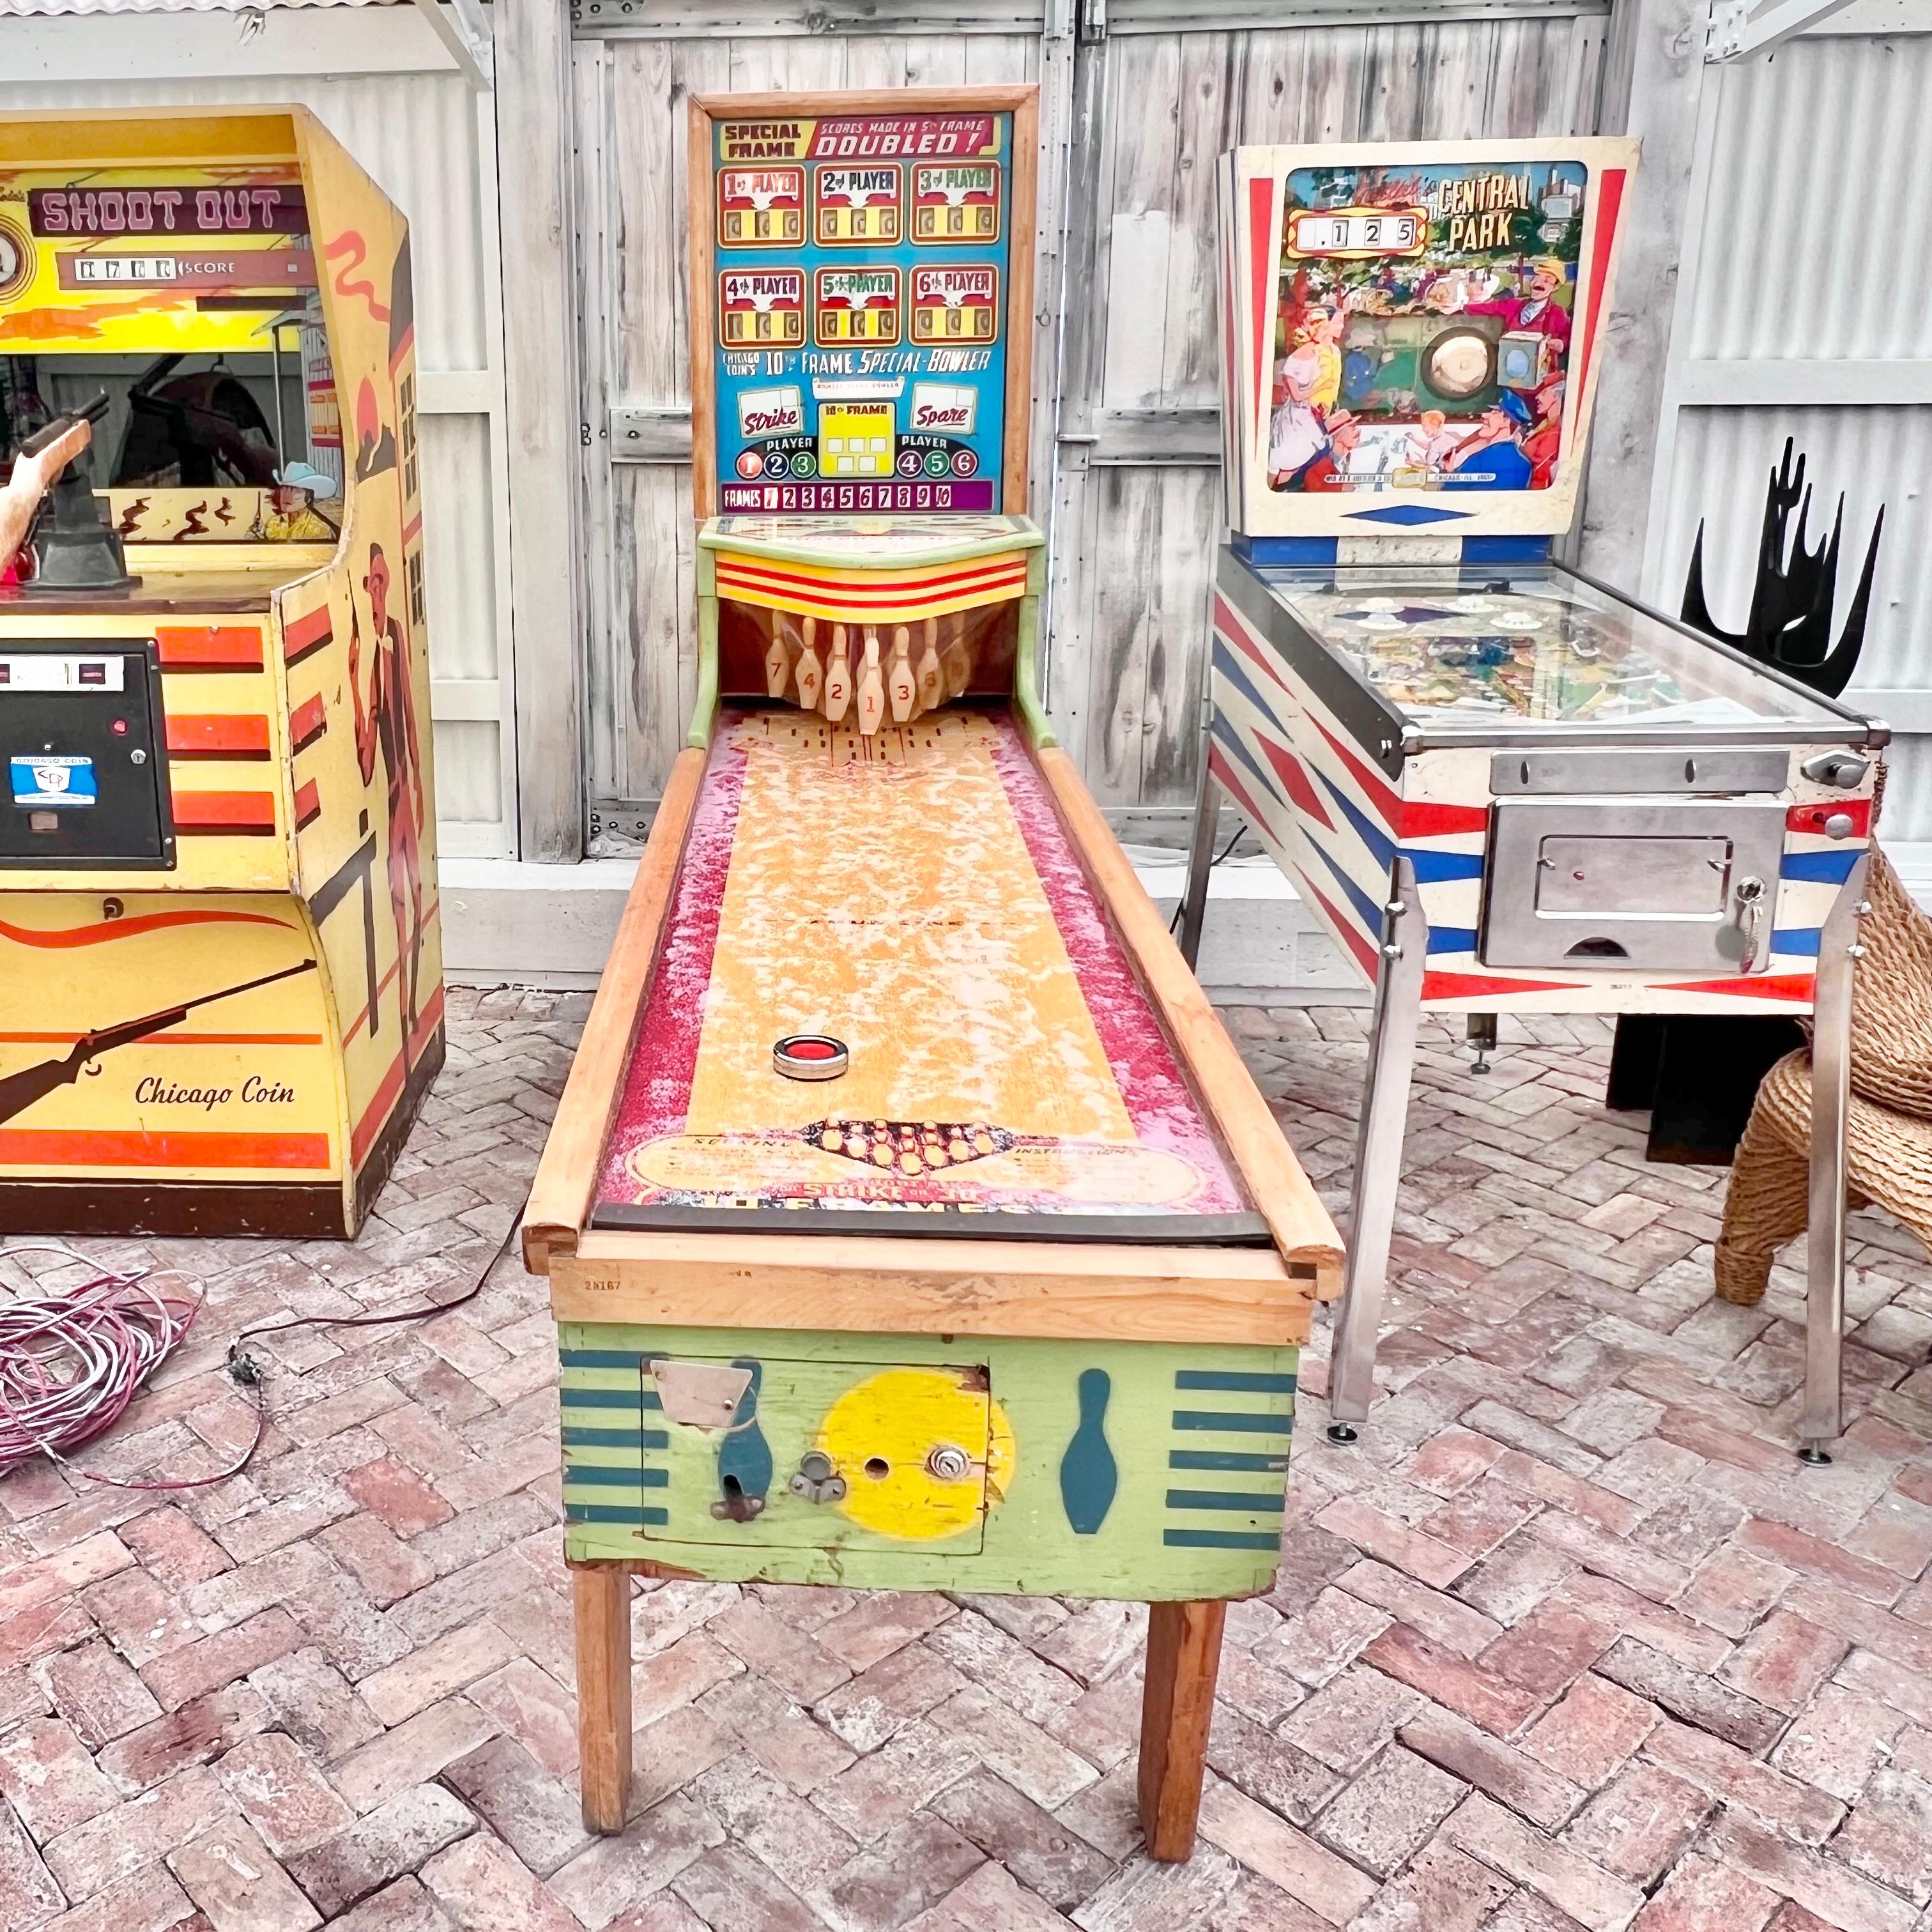 Vintage bowling arcade machine from 1949 manufactured by Chicago Coin. Wooden cabinet painted with bowling designs in primary colors, lighted scoreboard and Formica lane. Player uses shuffle board style puck to hit pins. Up to 6 players can play